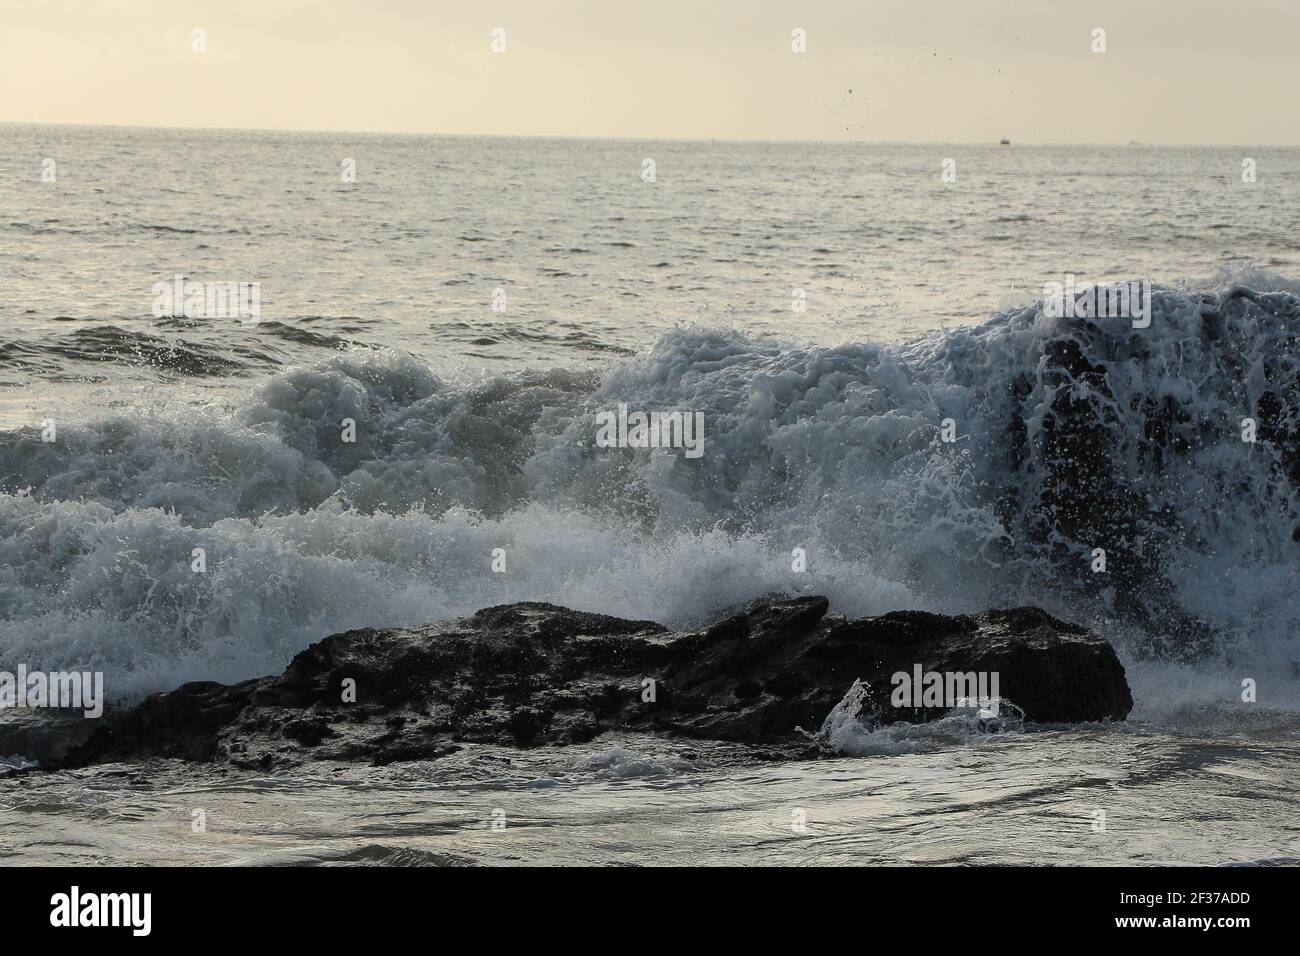 Waves crashing over rocks and up onto the Carlyon Bay beach outside St Austell, Cornwall, England following a storm far out to sea in the Atlantic oce Stock Photo